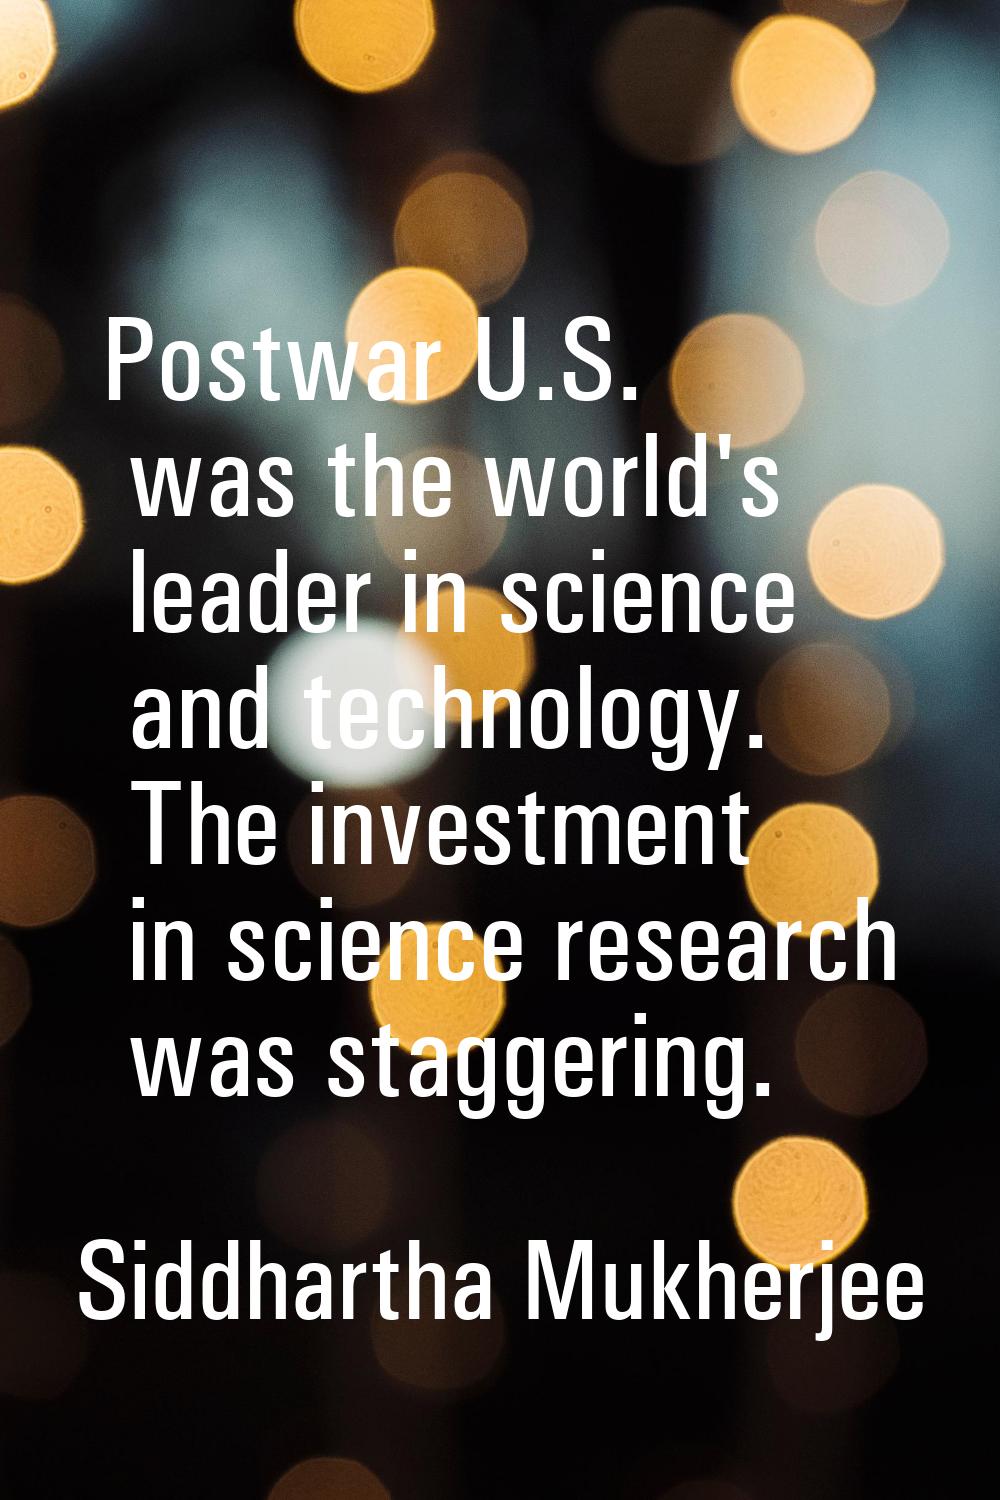 Postwar U.S. was the world's leader in science and technology. The investment in science research w